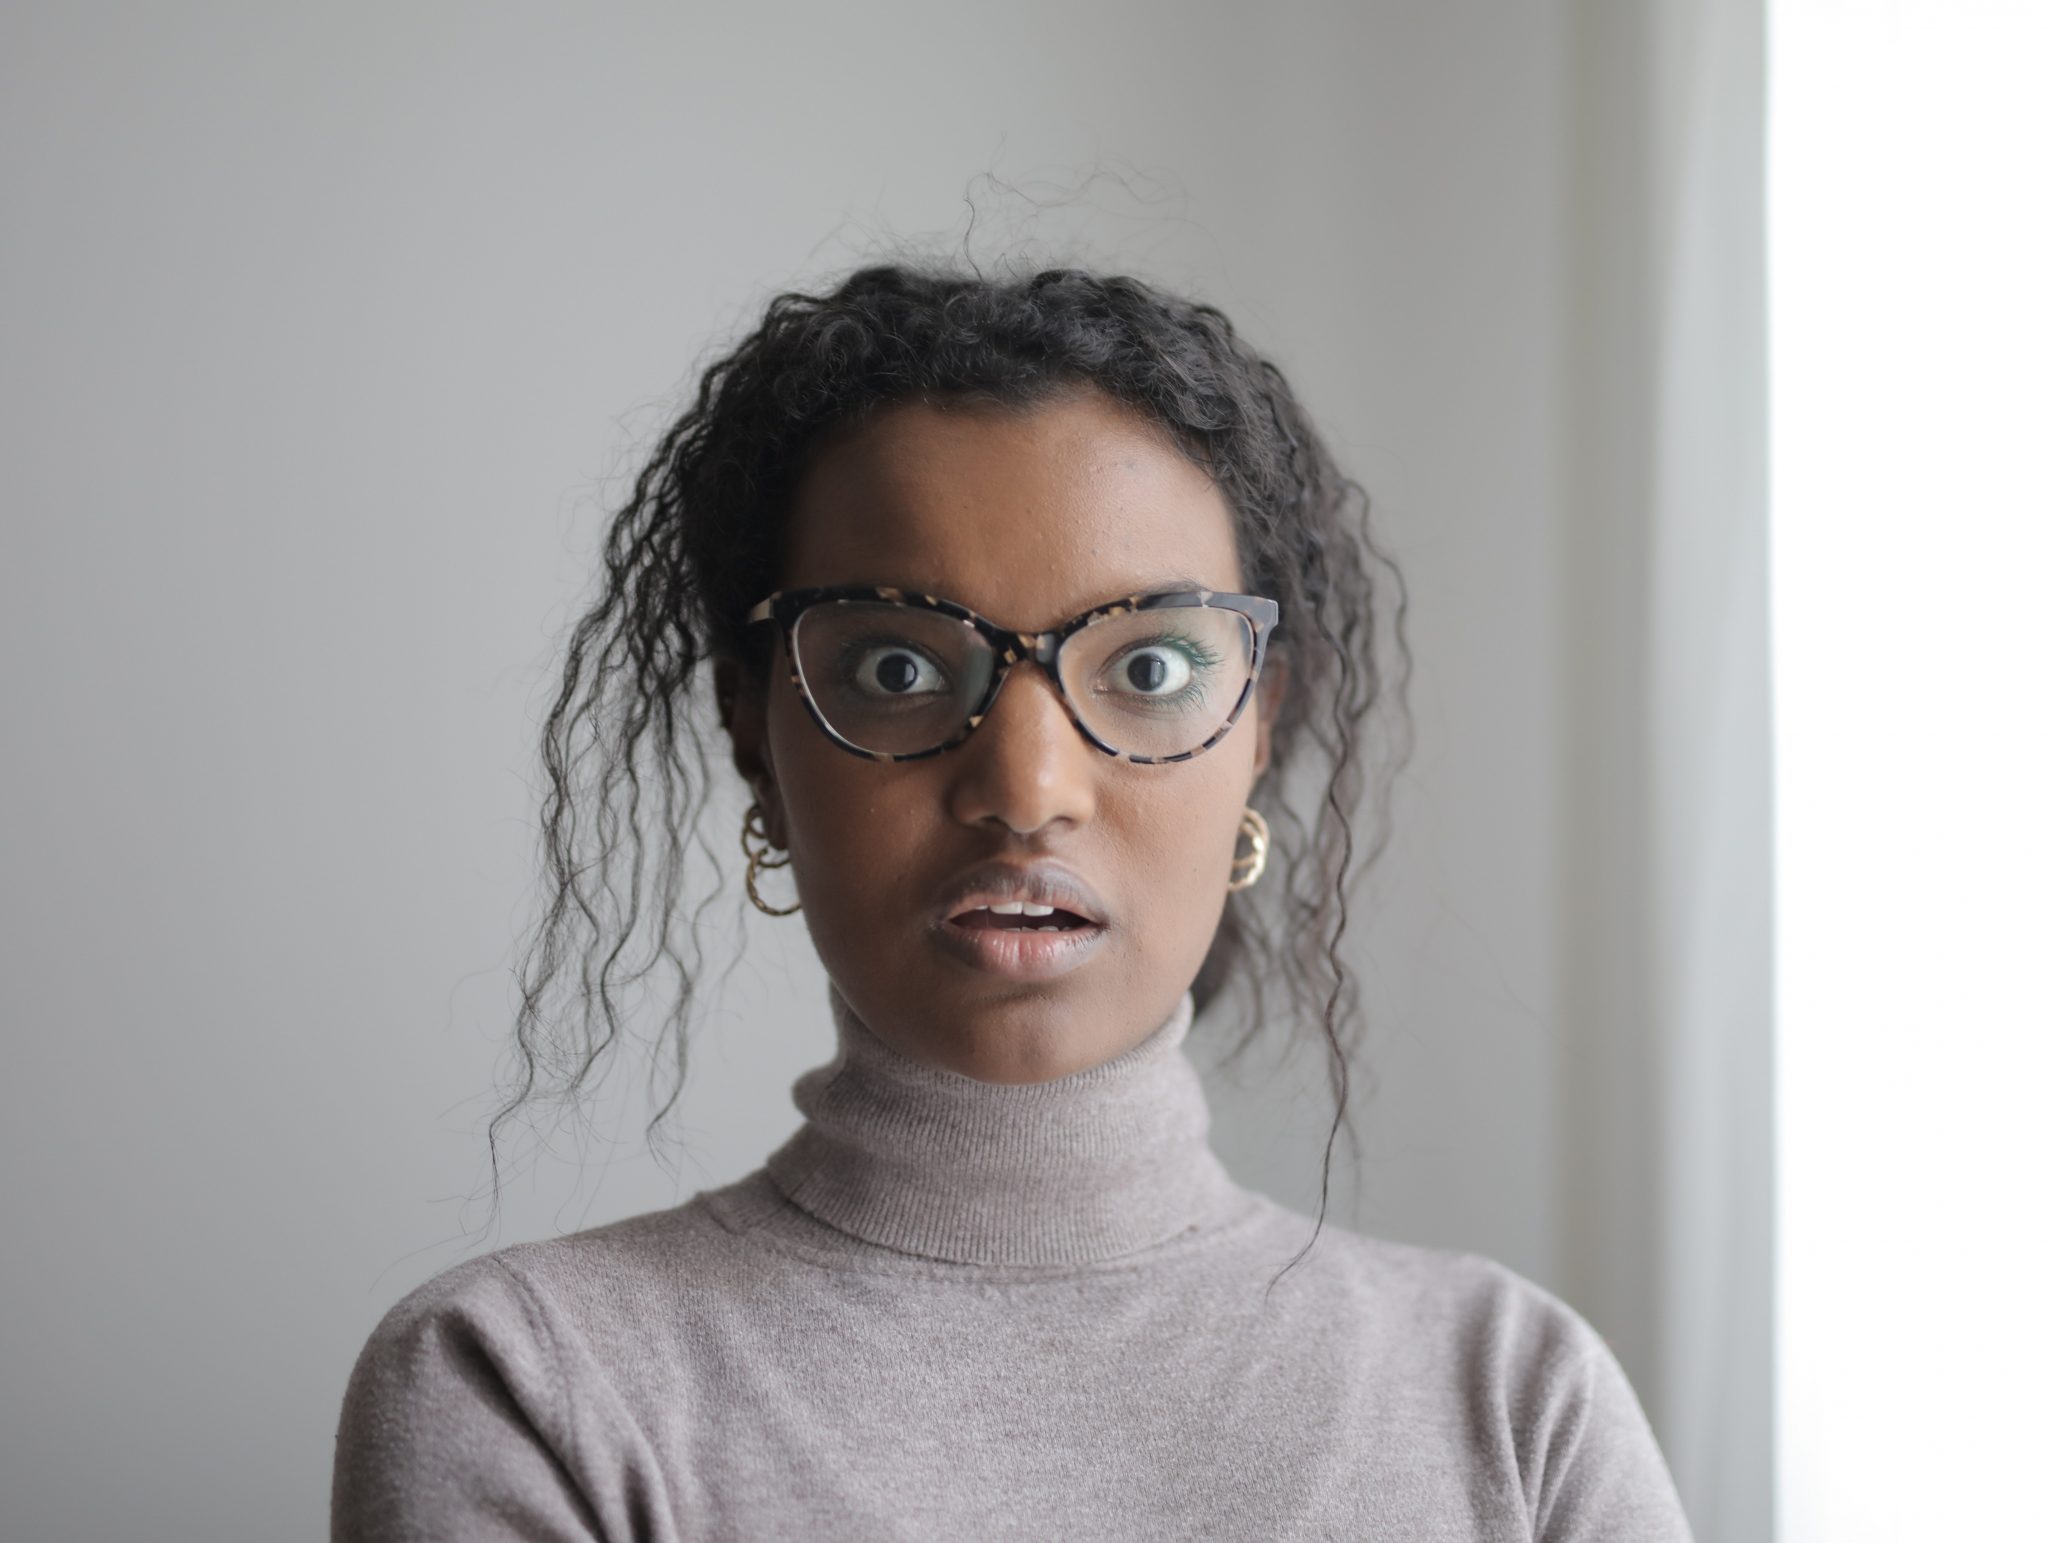 A young woman with dark skin, glasses, hoop earrings and a beige turtleneck looks directly at the camera with an expression of surprise and concern.]